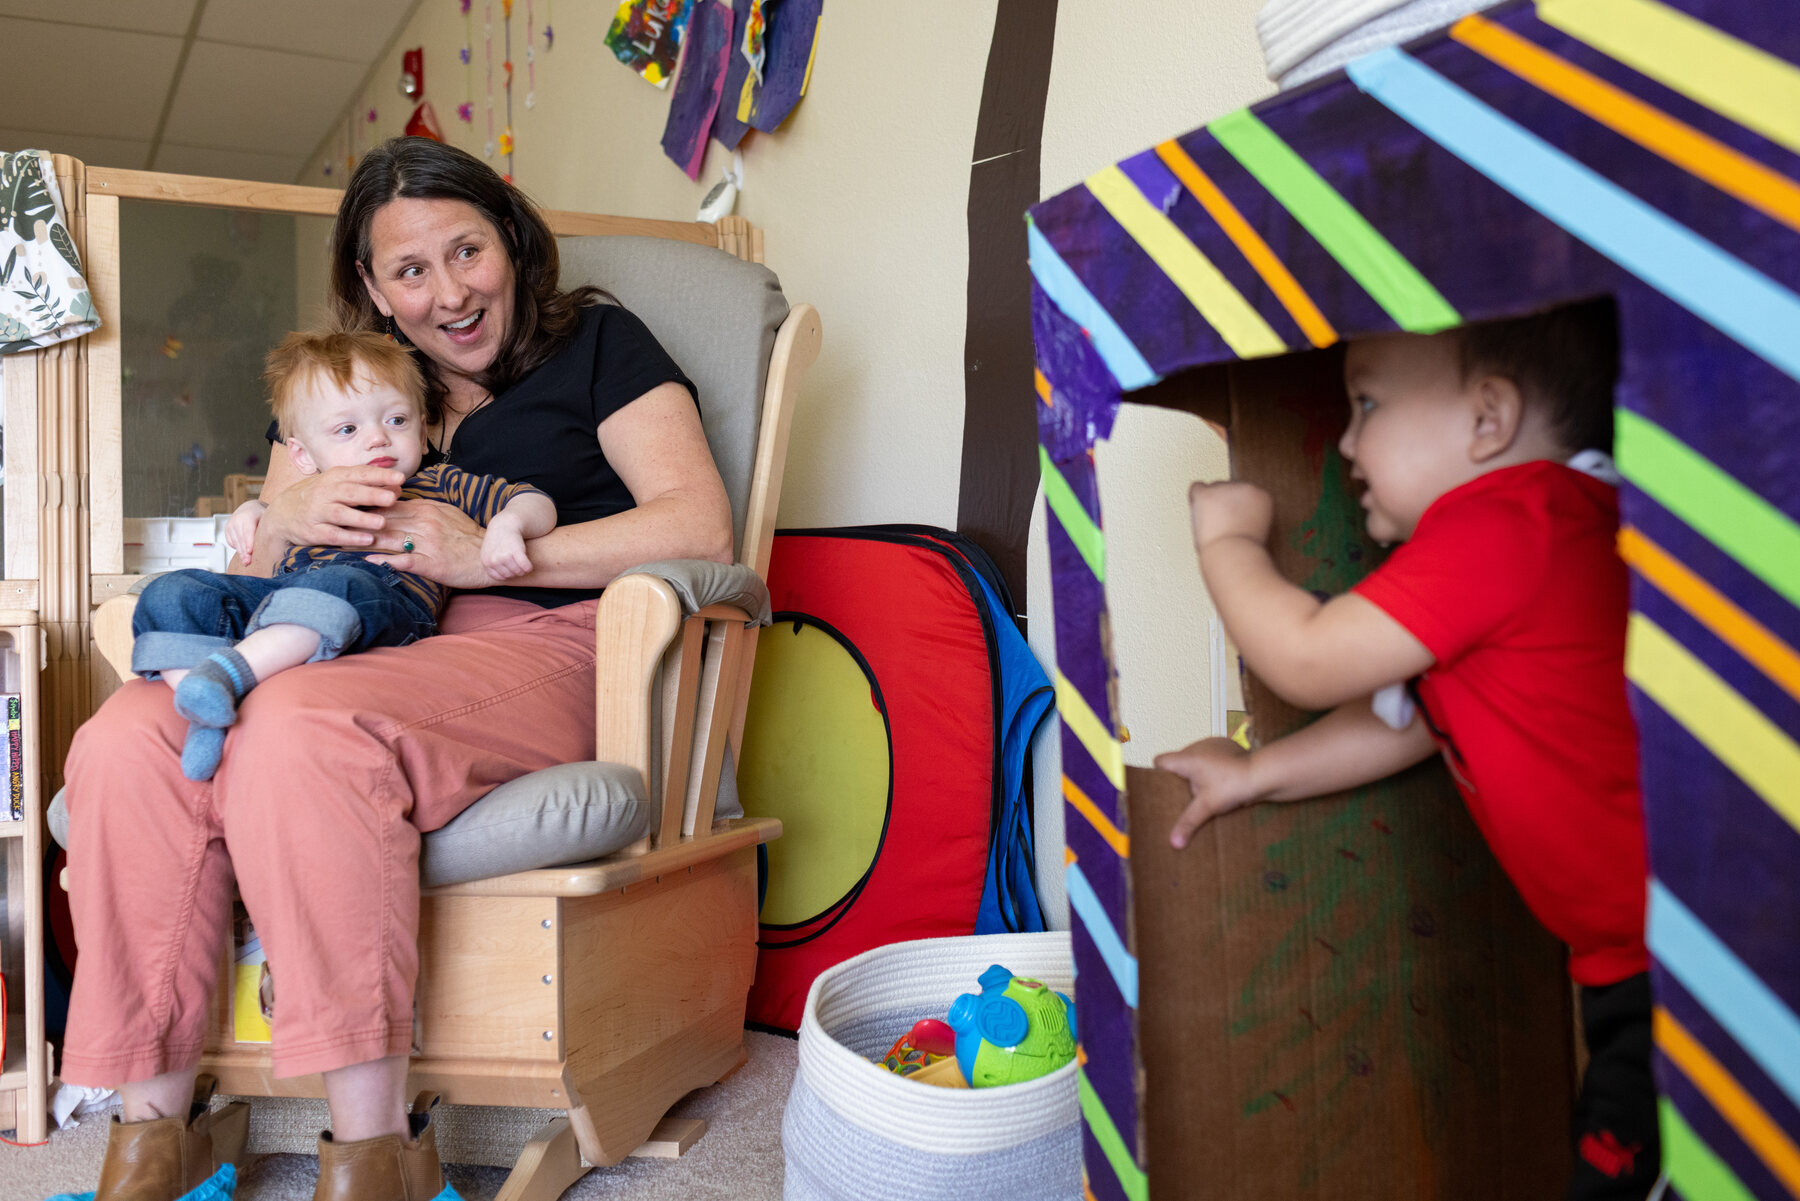 A woman sits in a chair with an infant while a toddler plays next to them.